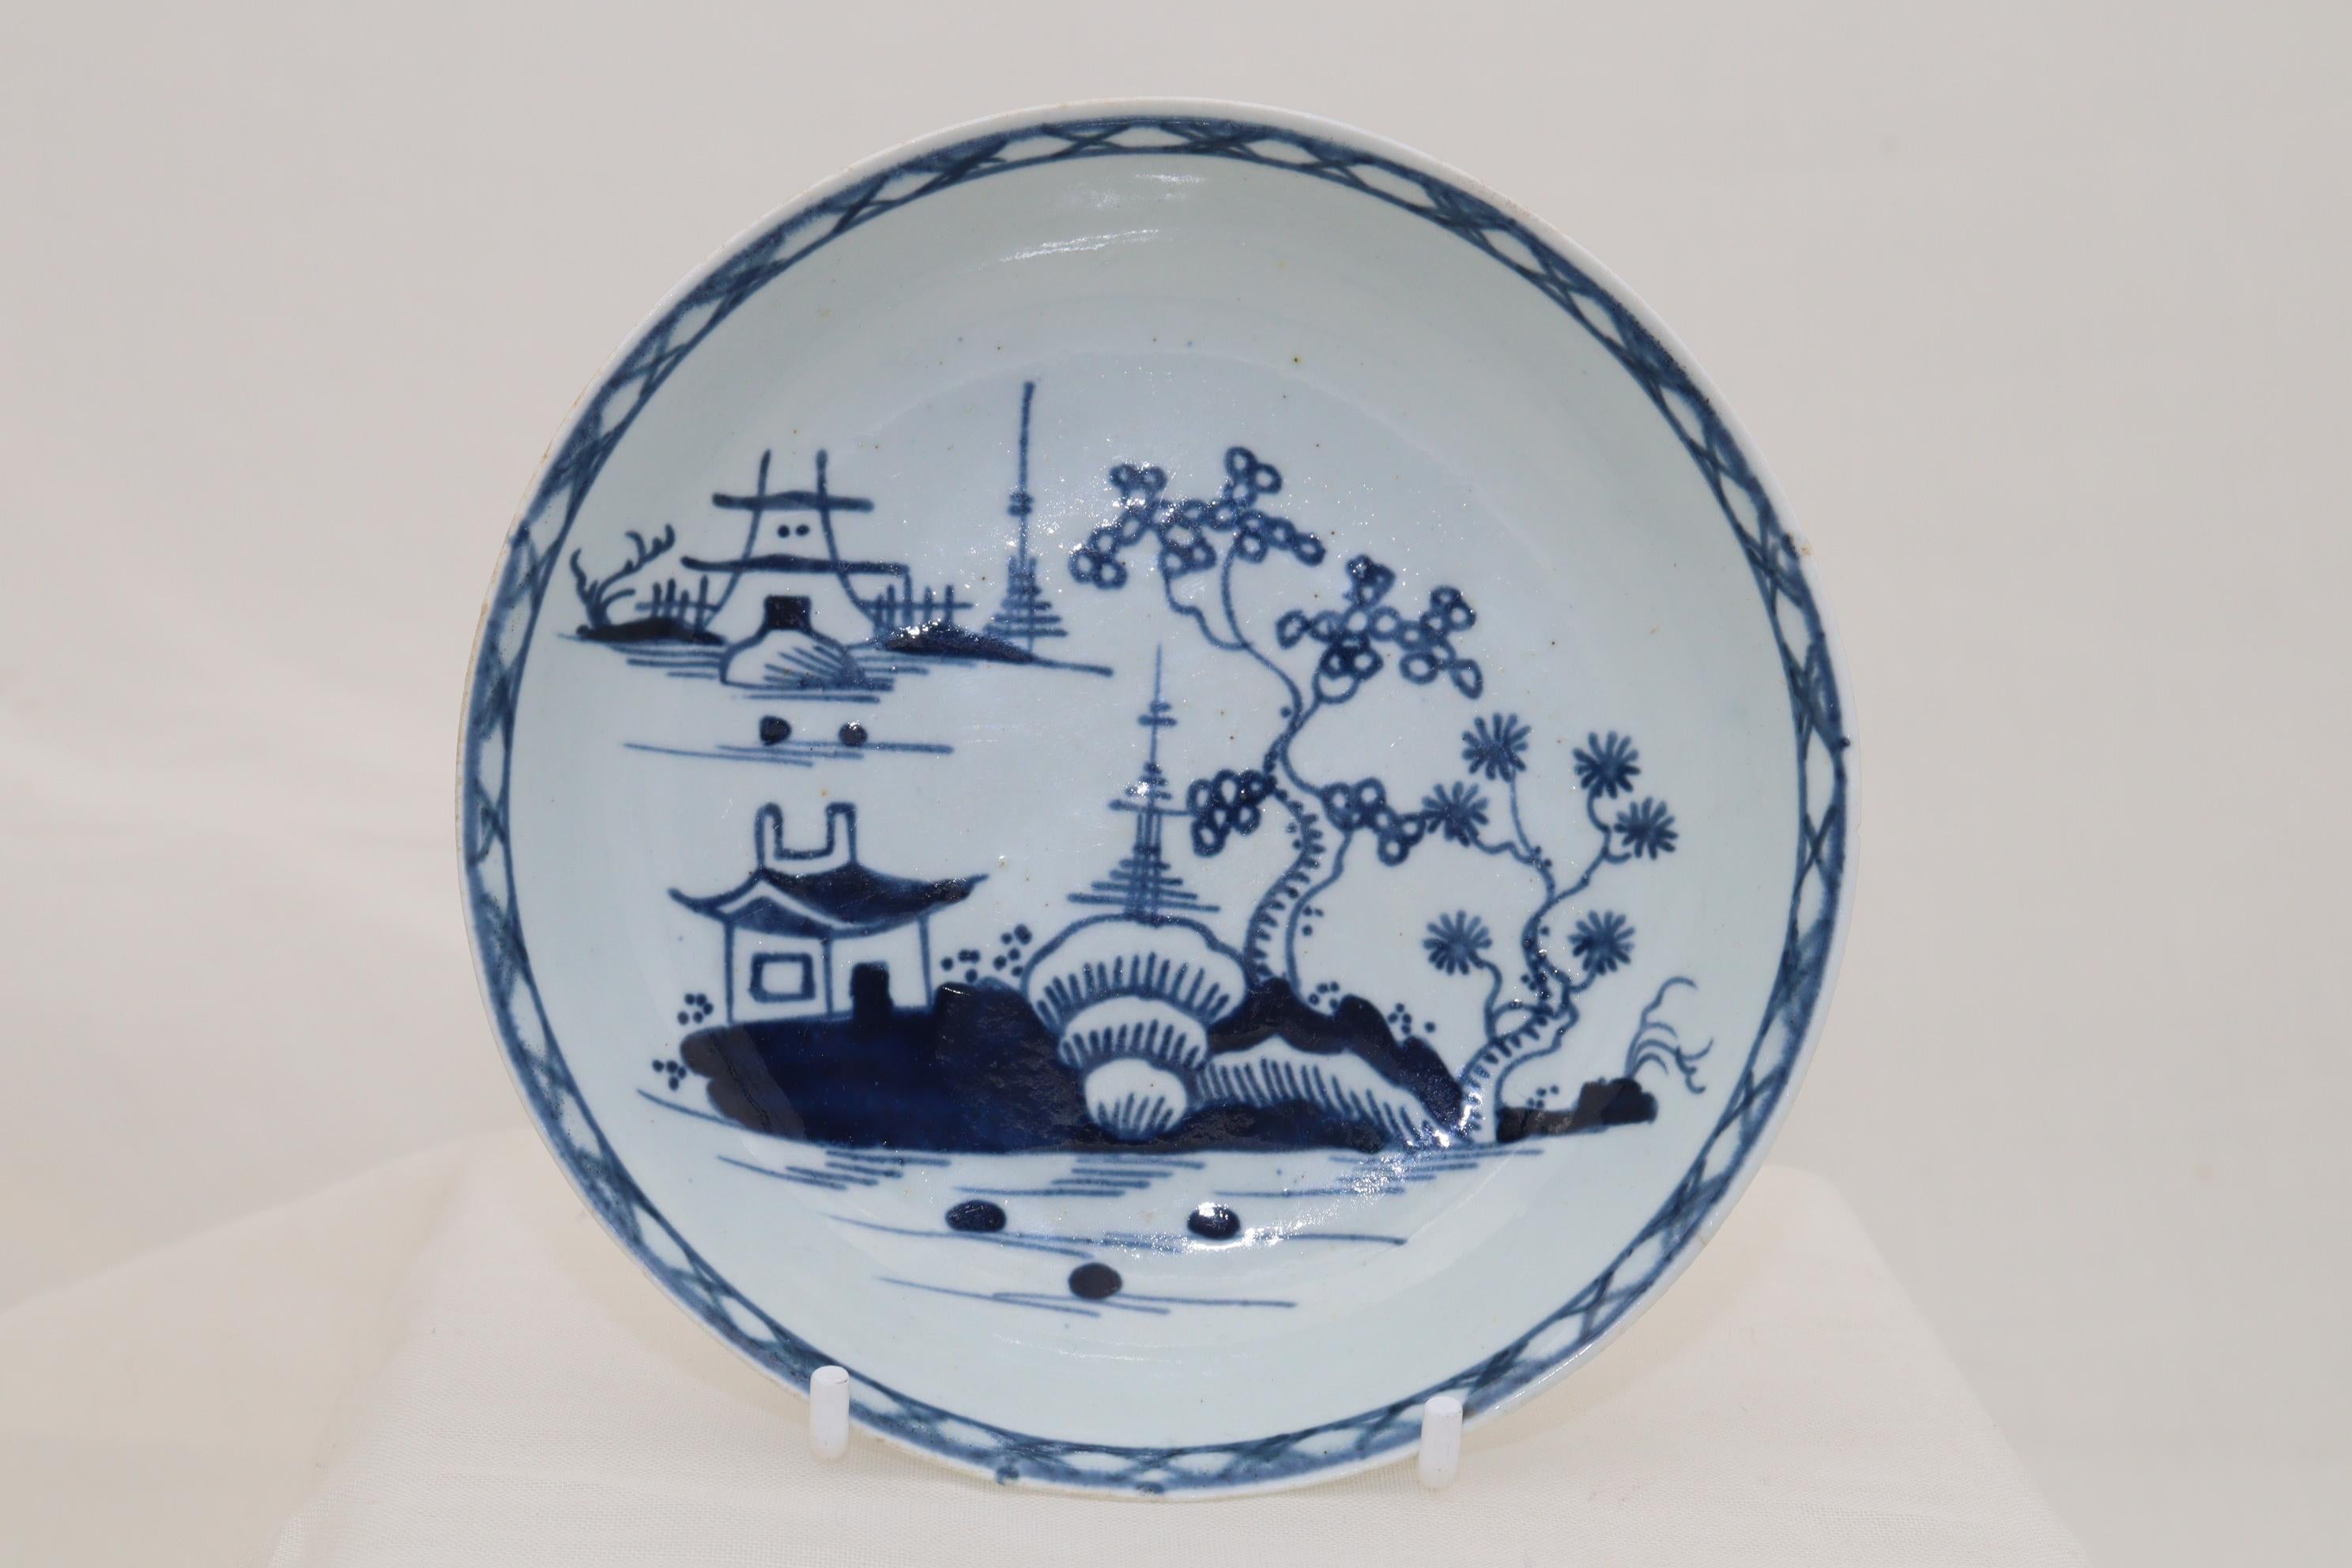 This Liverpool porcelain tea bowl and saucer is decorated with the hand painted 